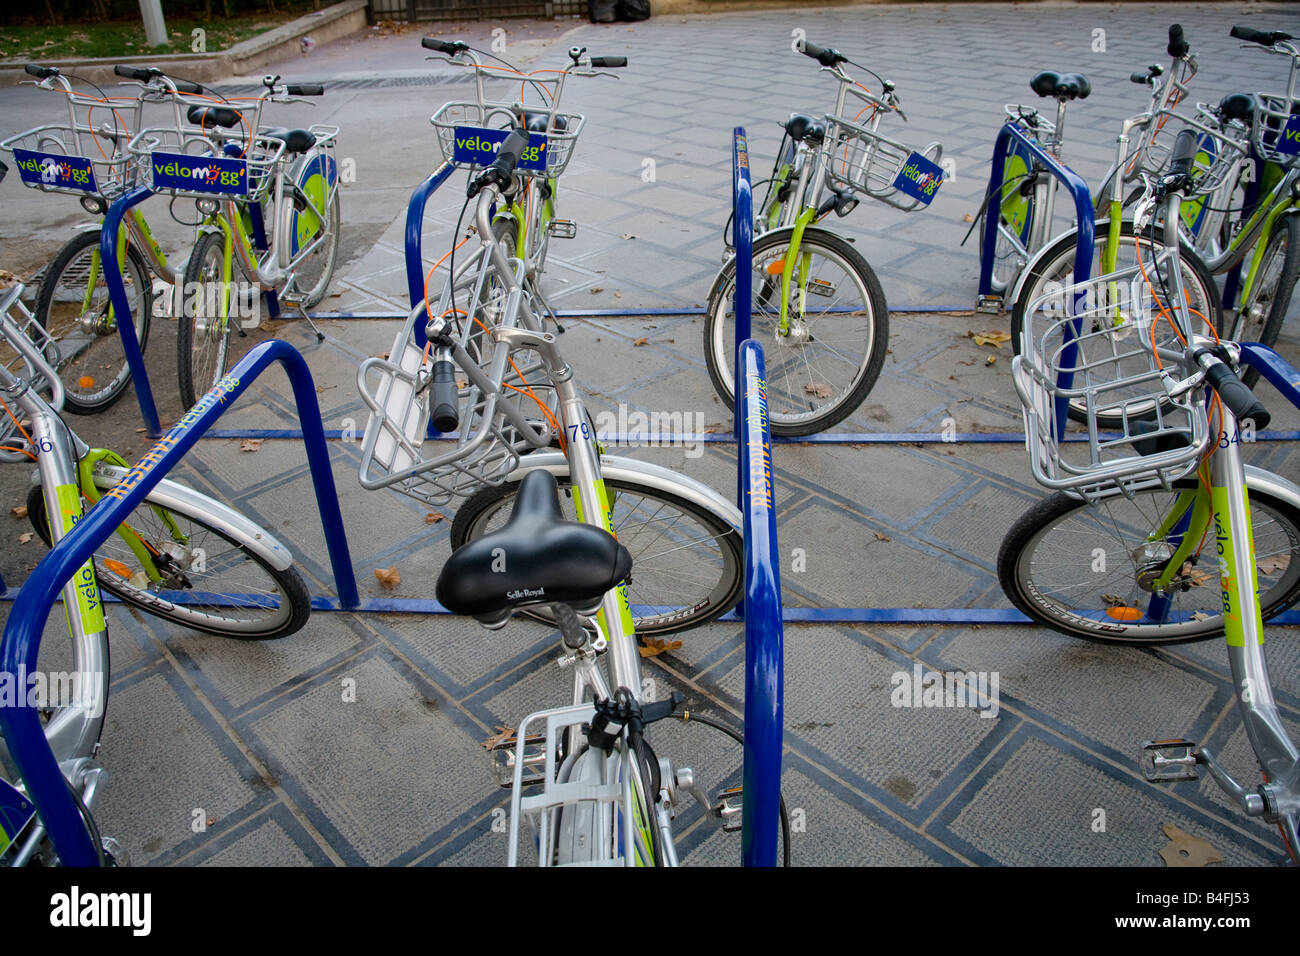 Public use bikes provided by the local tourist board in Montpellier, Southern France. Stock Photo